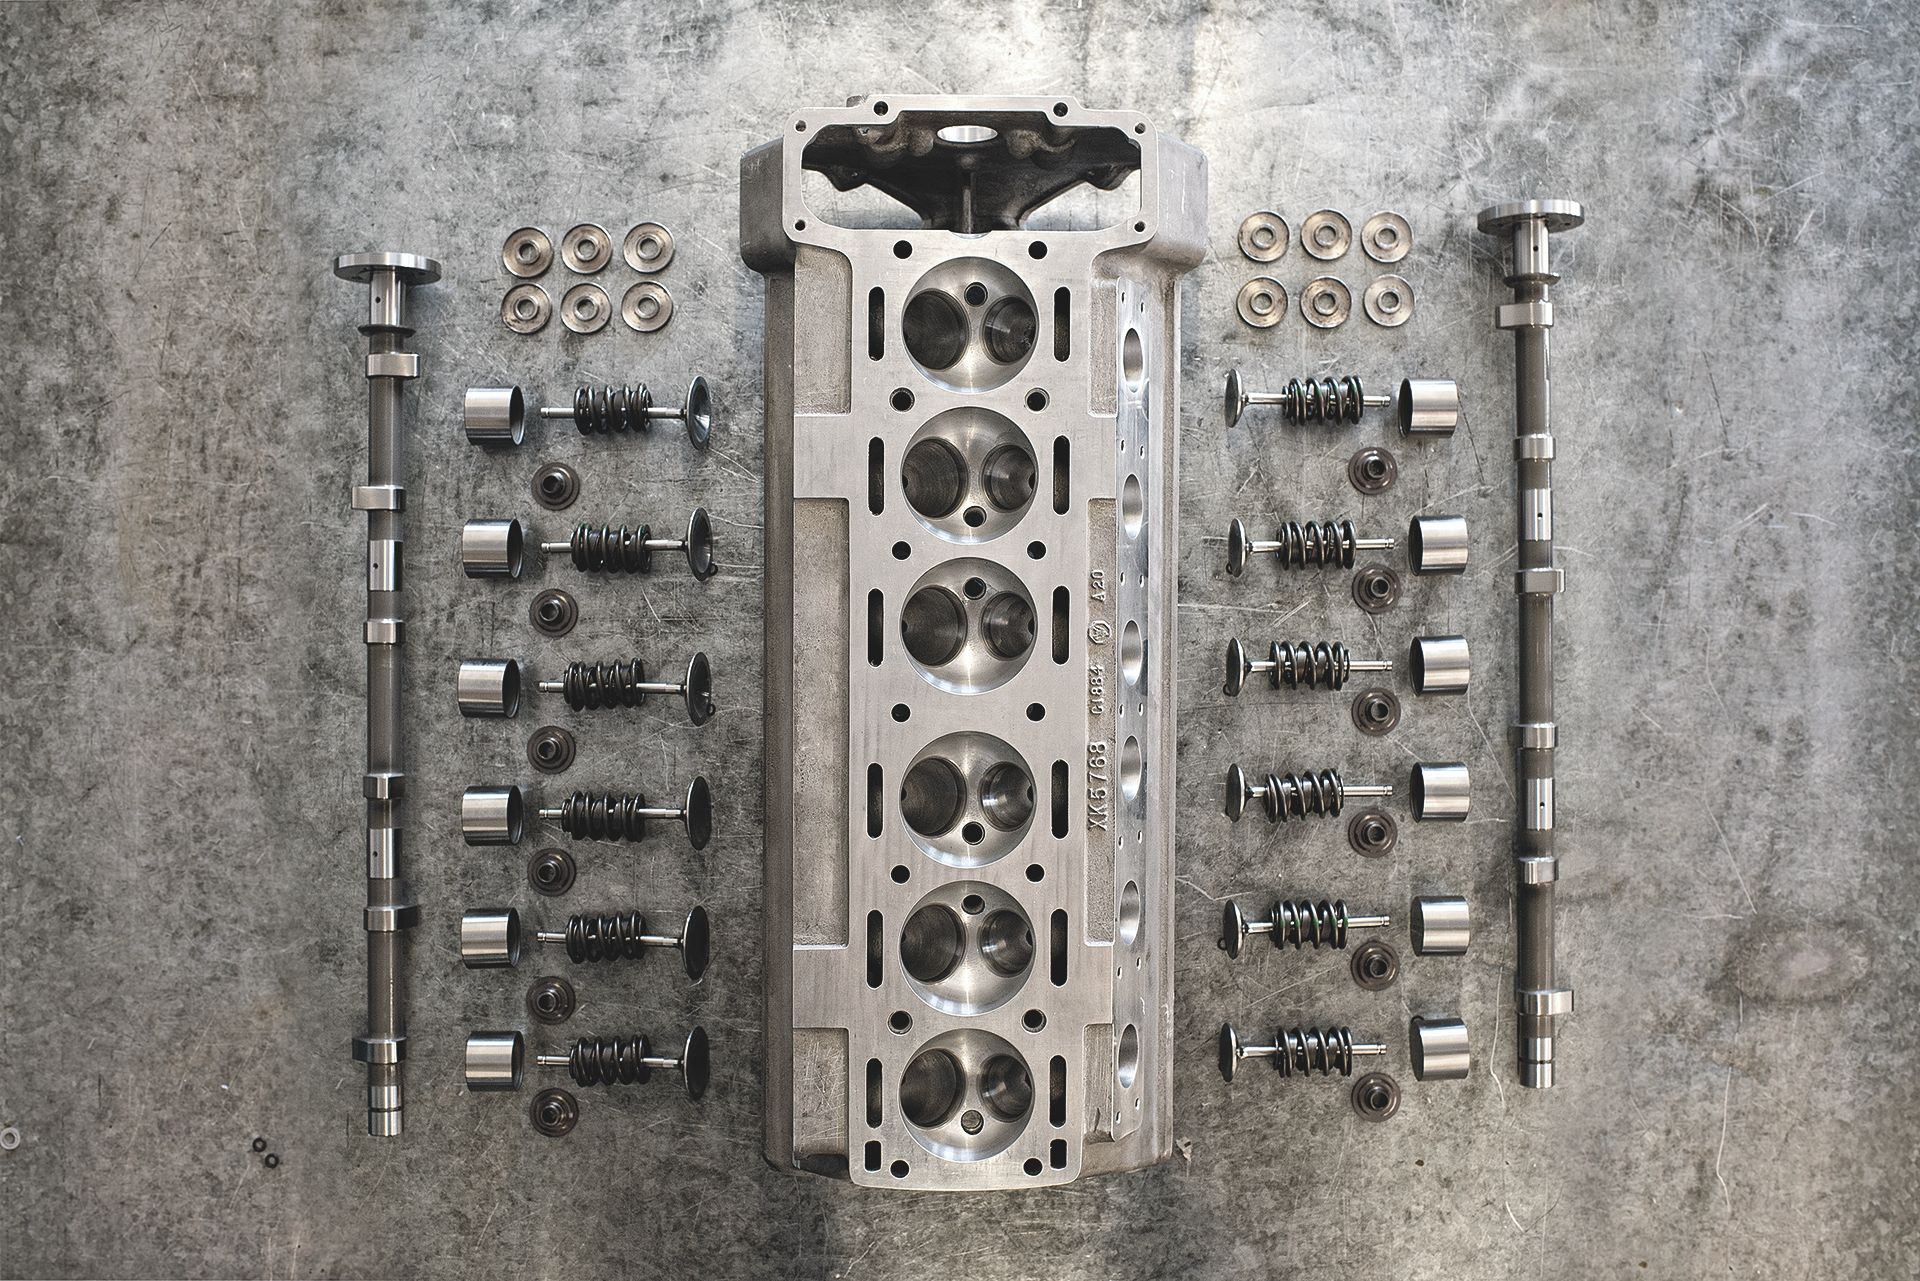 V6 Engine- It's The Most Common Six-Cylinder Configuration